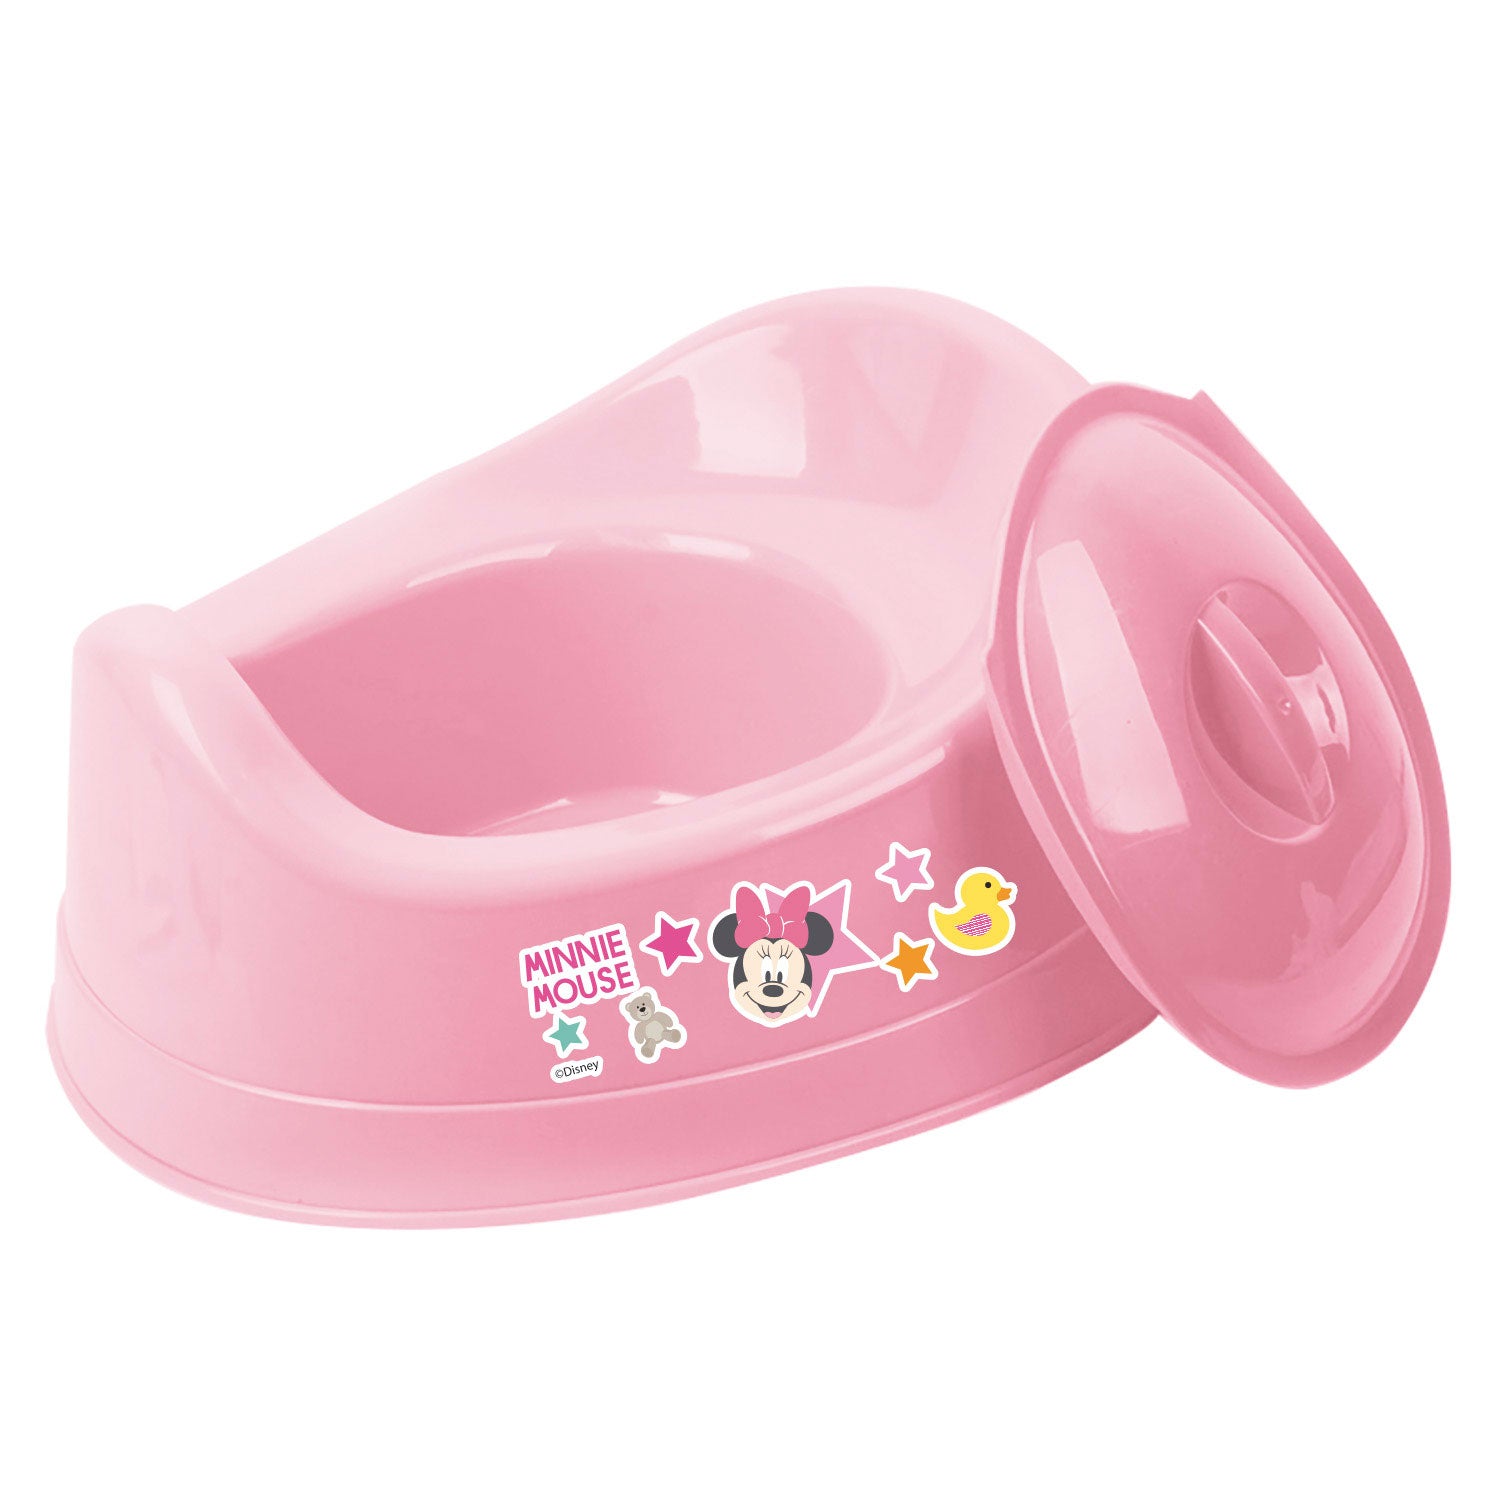 Minnie Mouse Plastic Potty With Lid